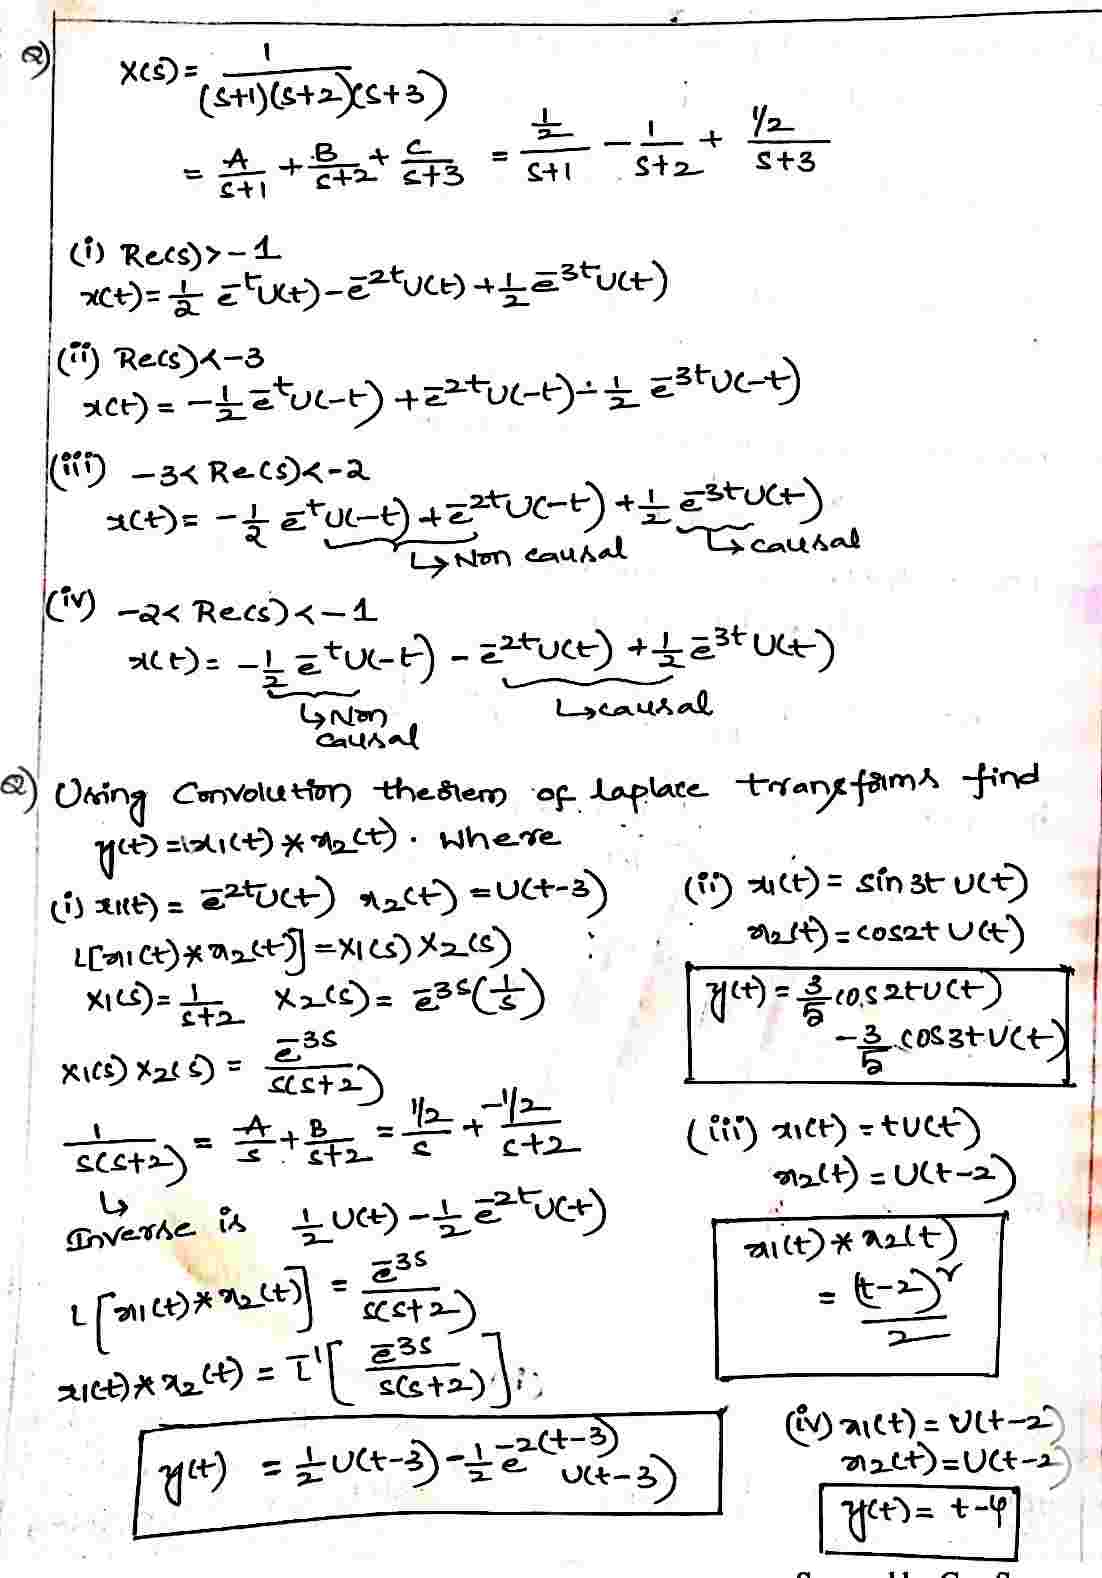 Evaluation_of_fourier_Coefficients